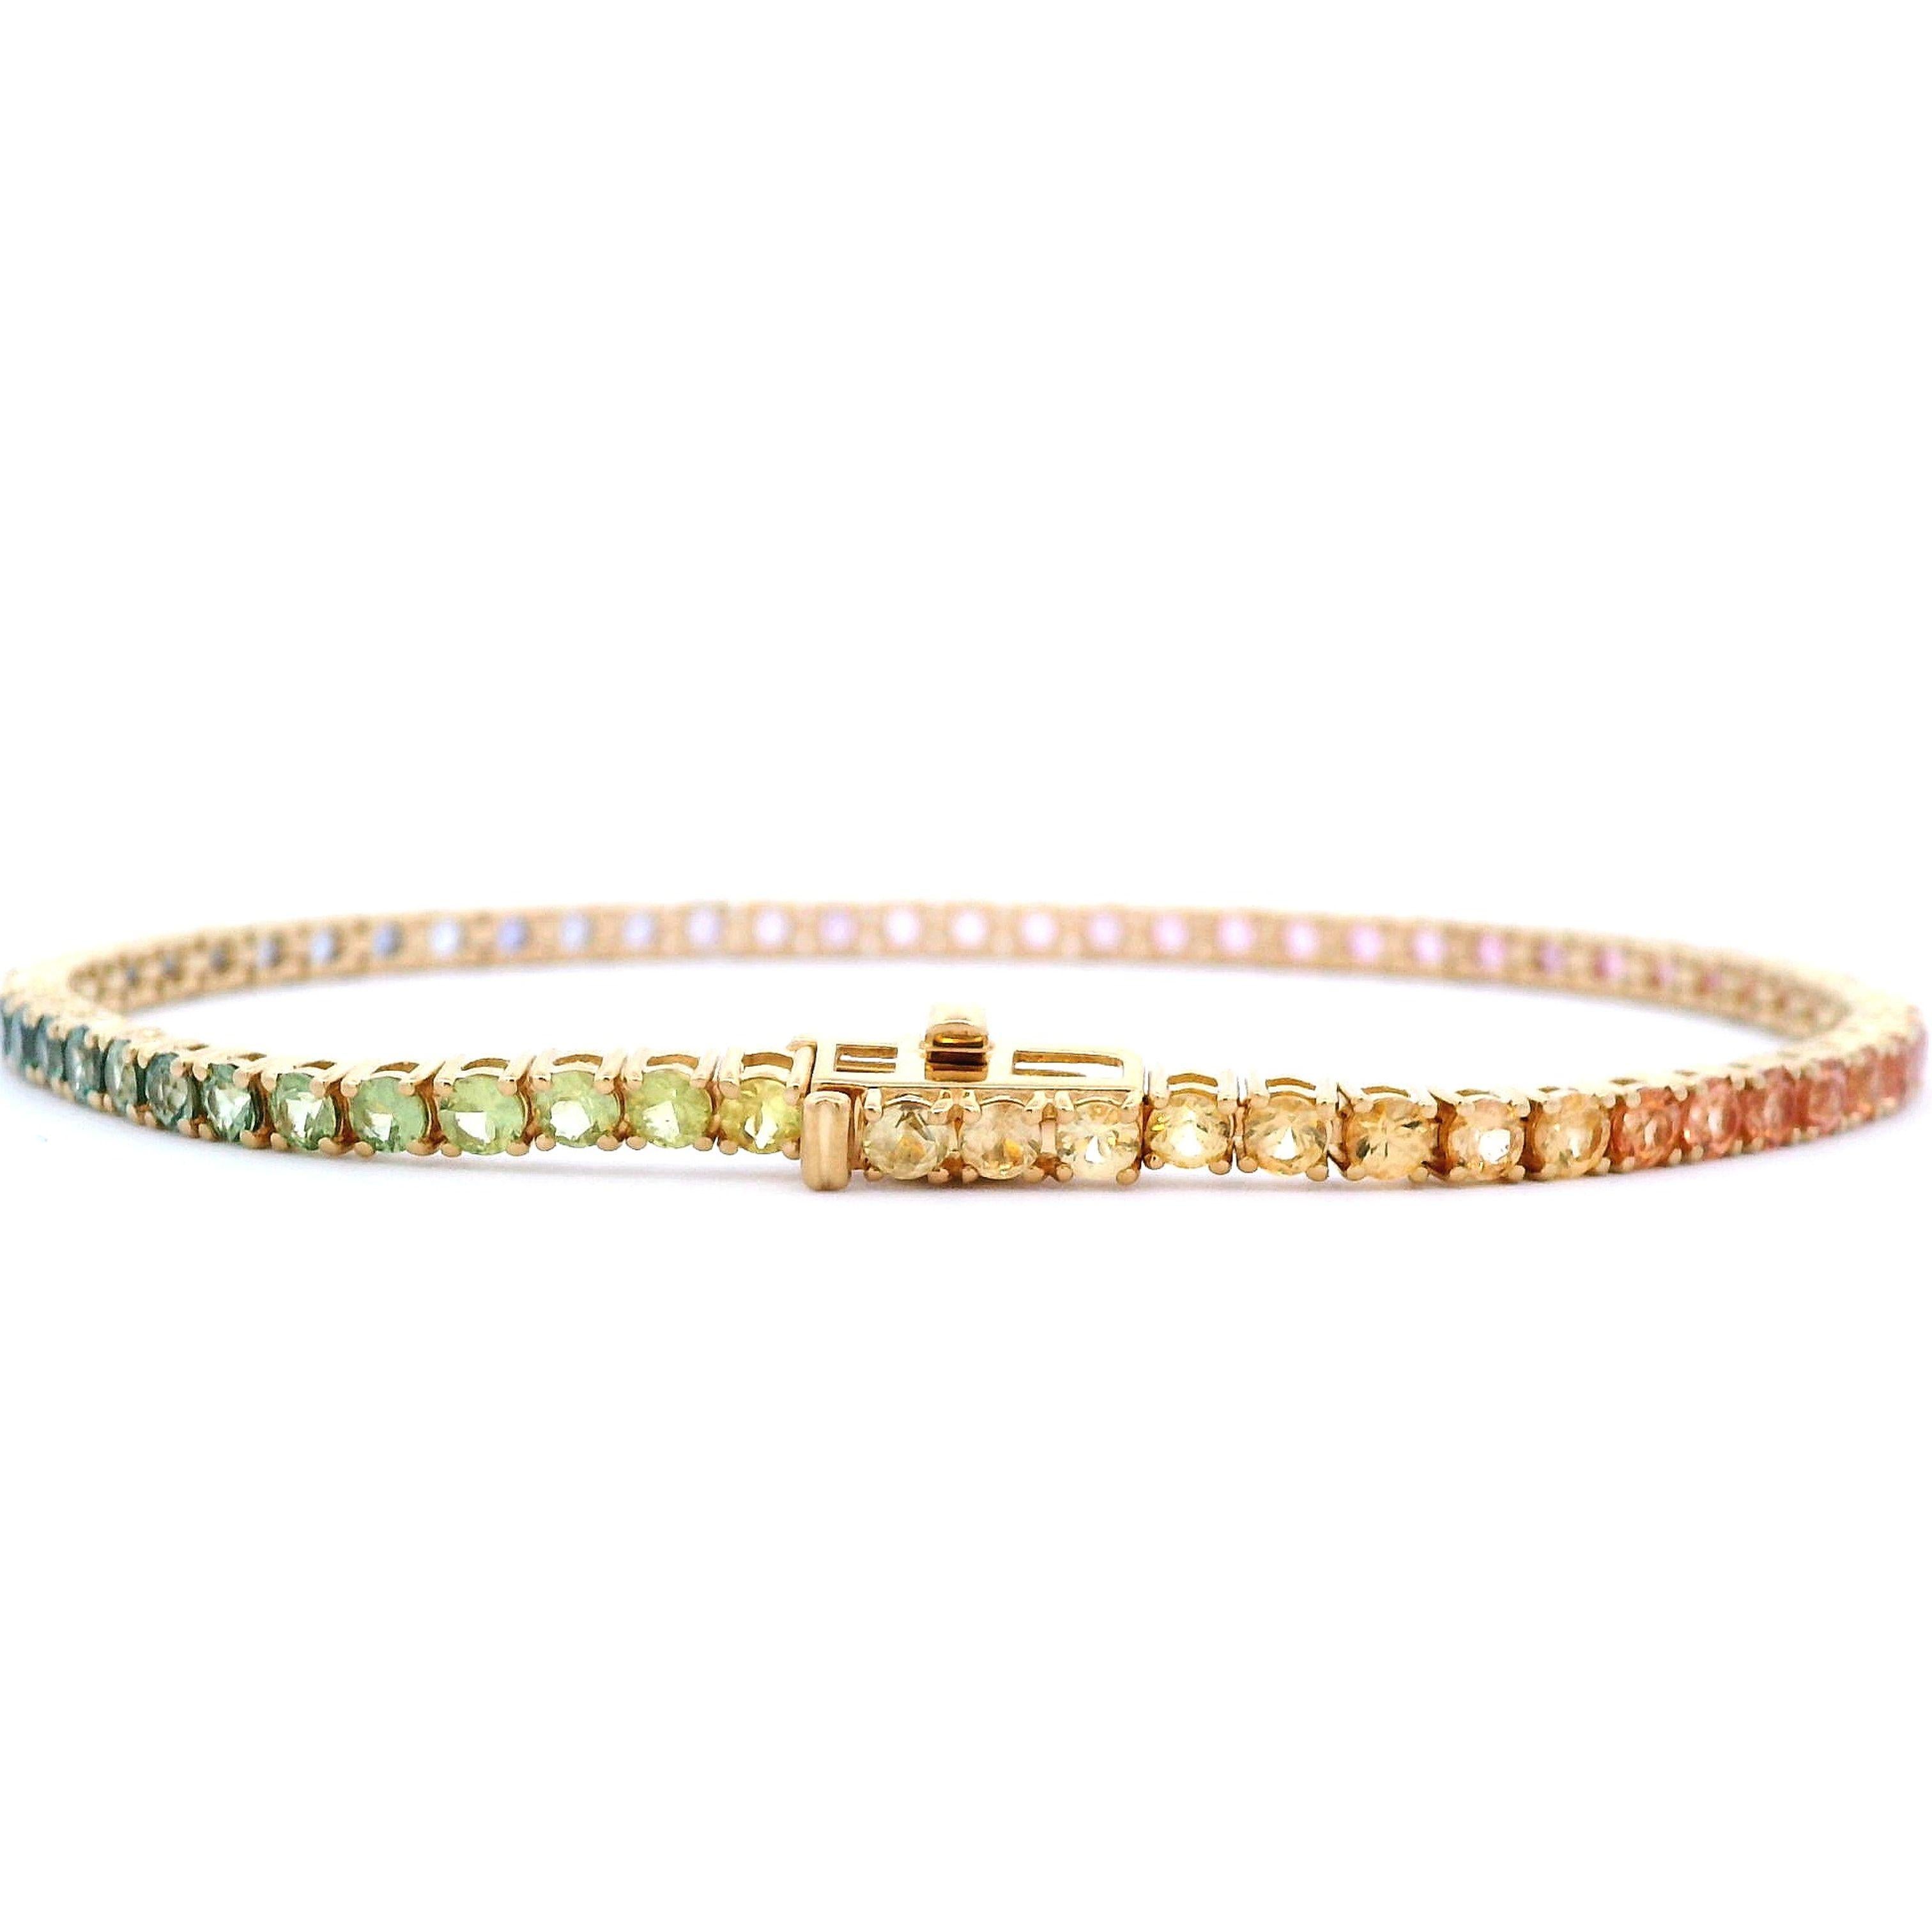 Exquisite and perfectly graduated rainbow multi color sapphire tennis bracelet, by Alexander Beverly Hills.
65 round sapphires, 6.20 carats total. Four prong set in 18k yellow gold, 8.92 grams, 7 inches.
Accommodated with an up-to-date digital